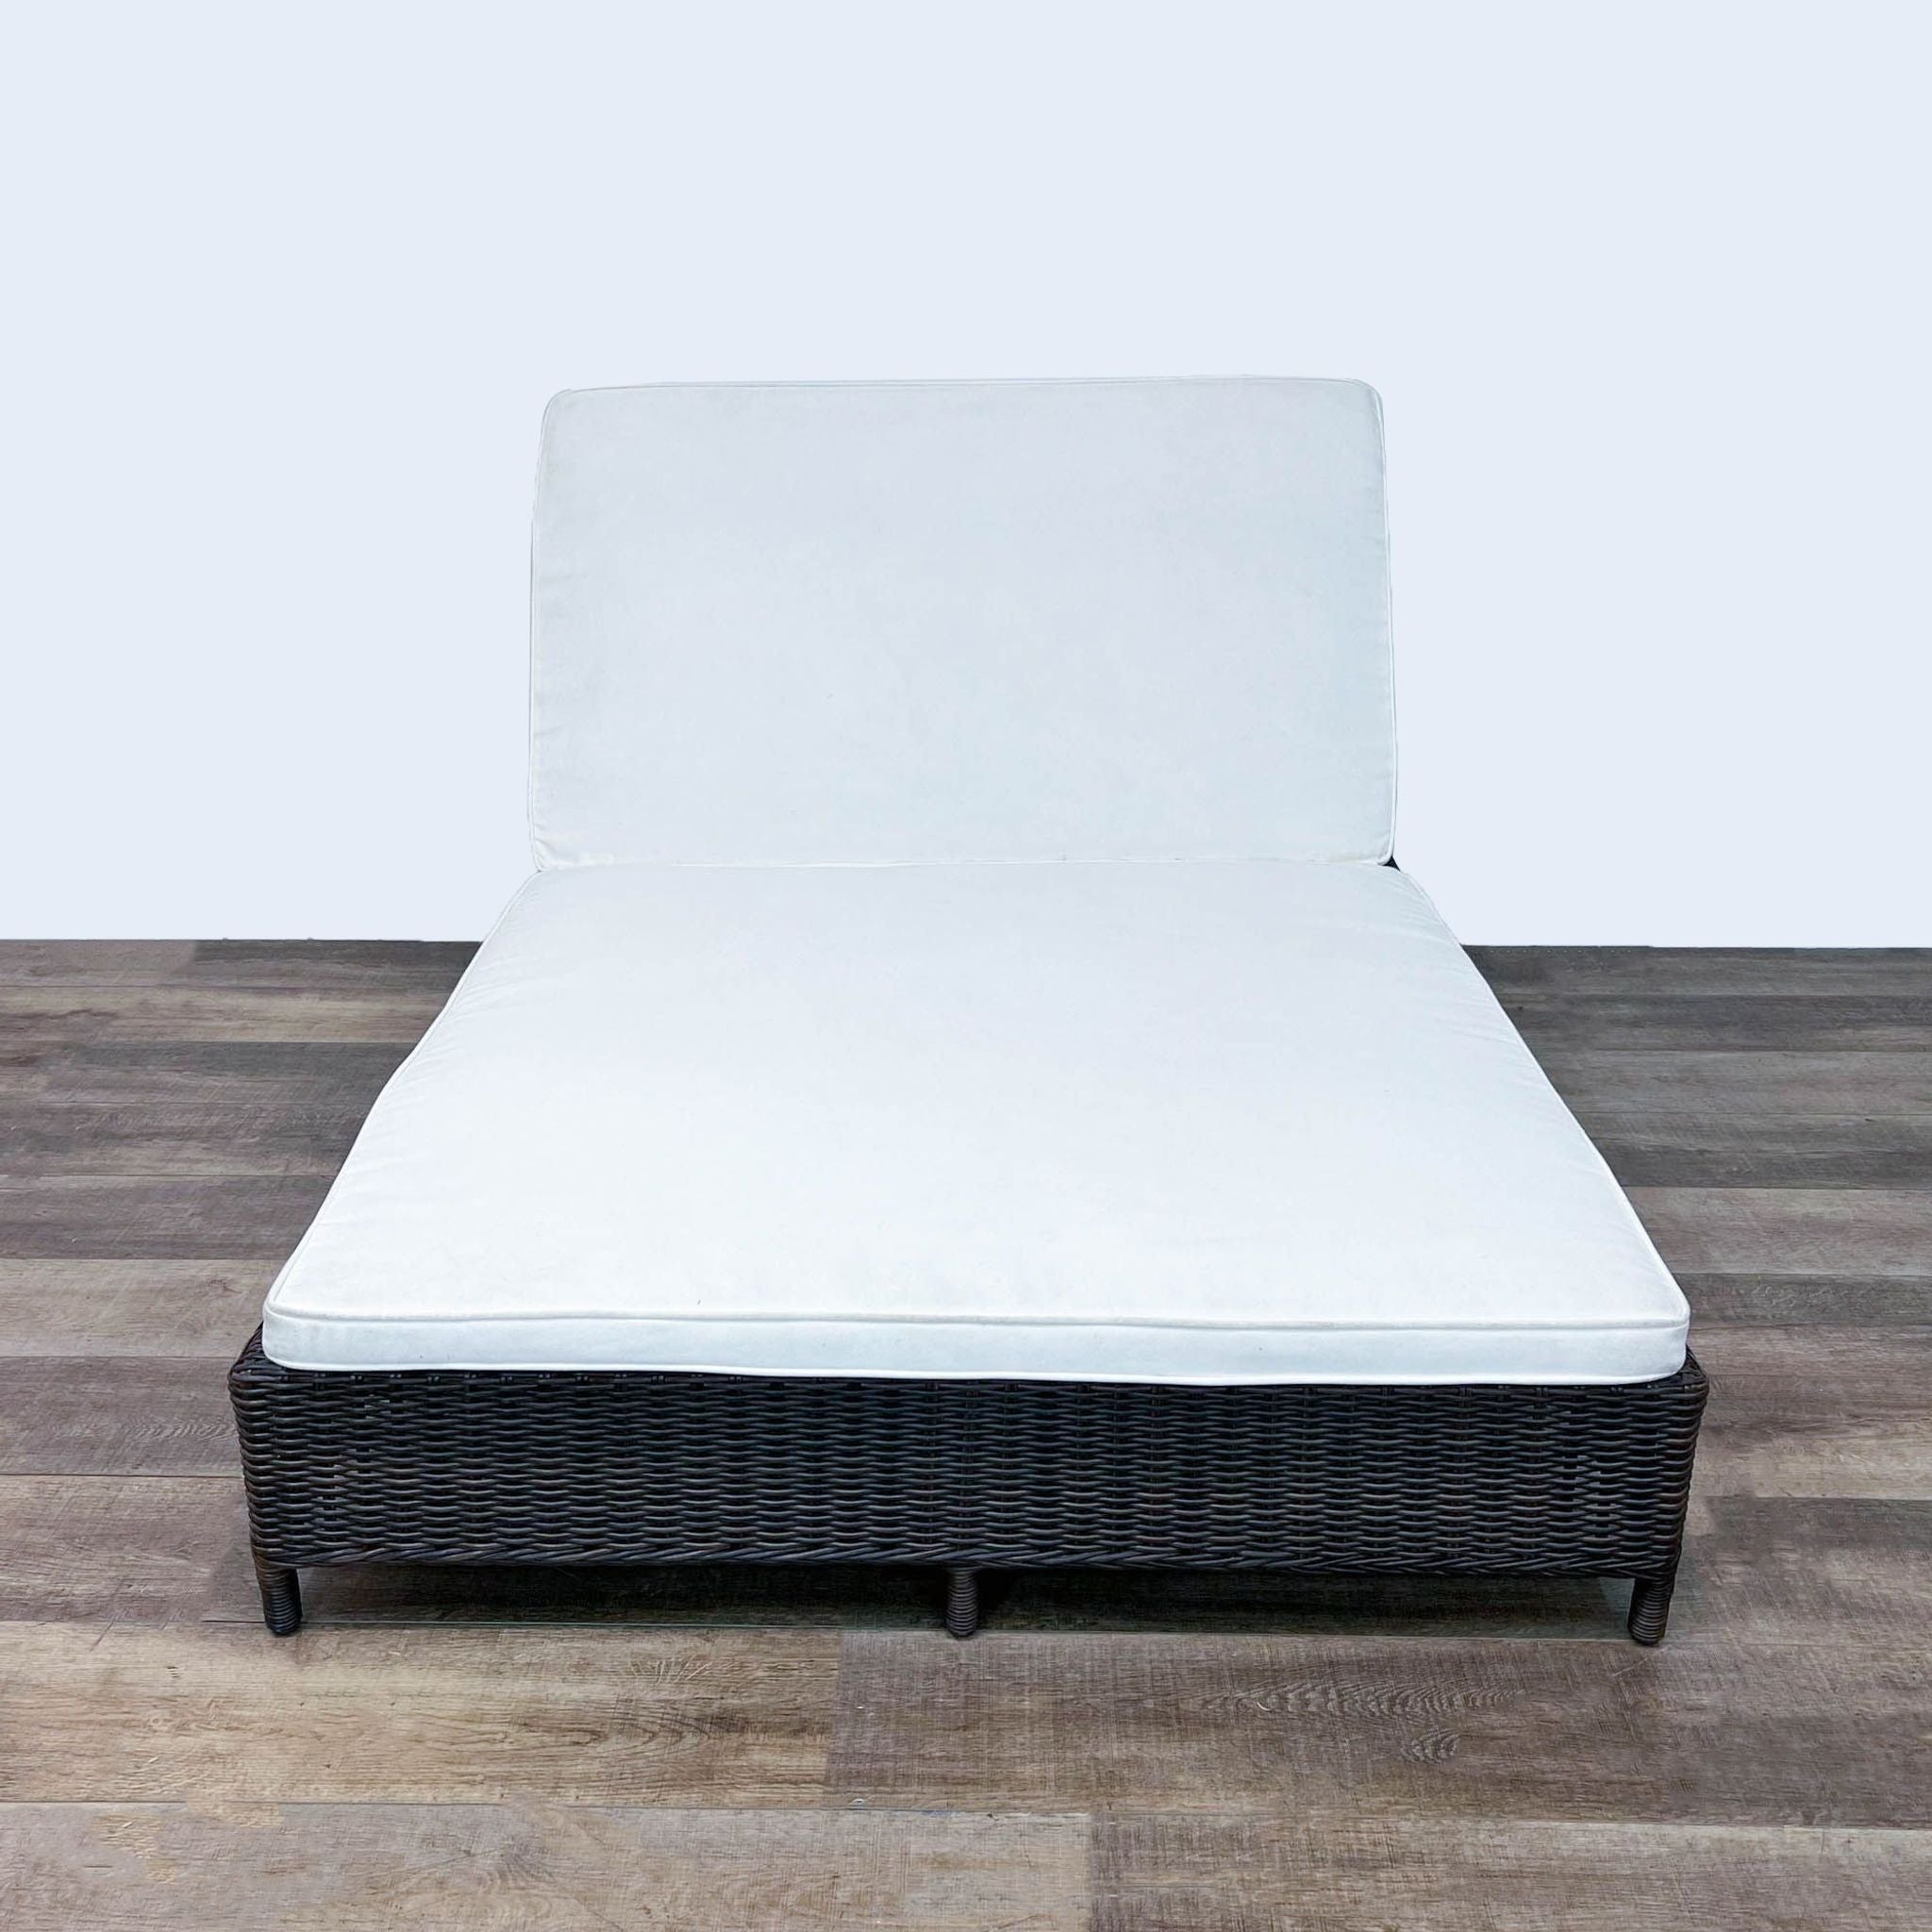 Pottery Barn resin wicker double chaise with an adjustable backrest and white cushion on an aluminum frame.